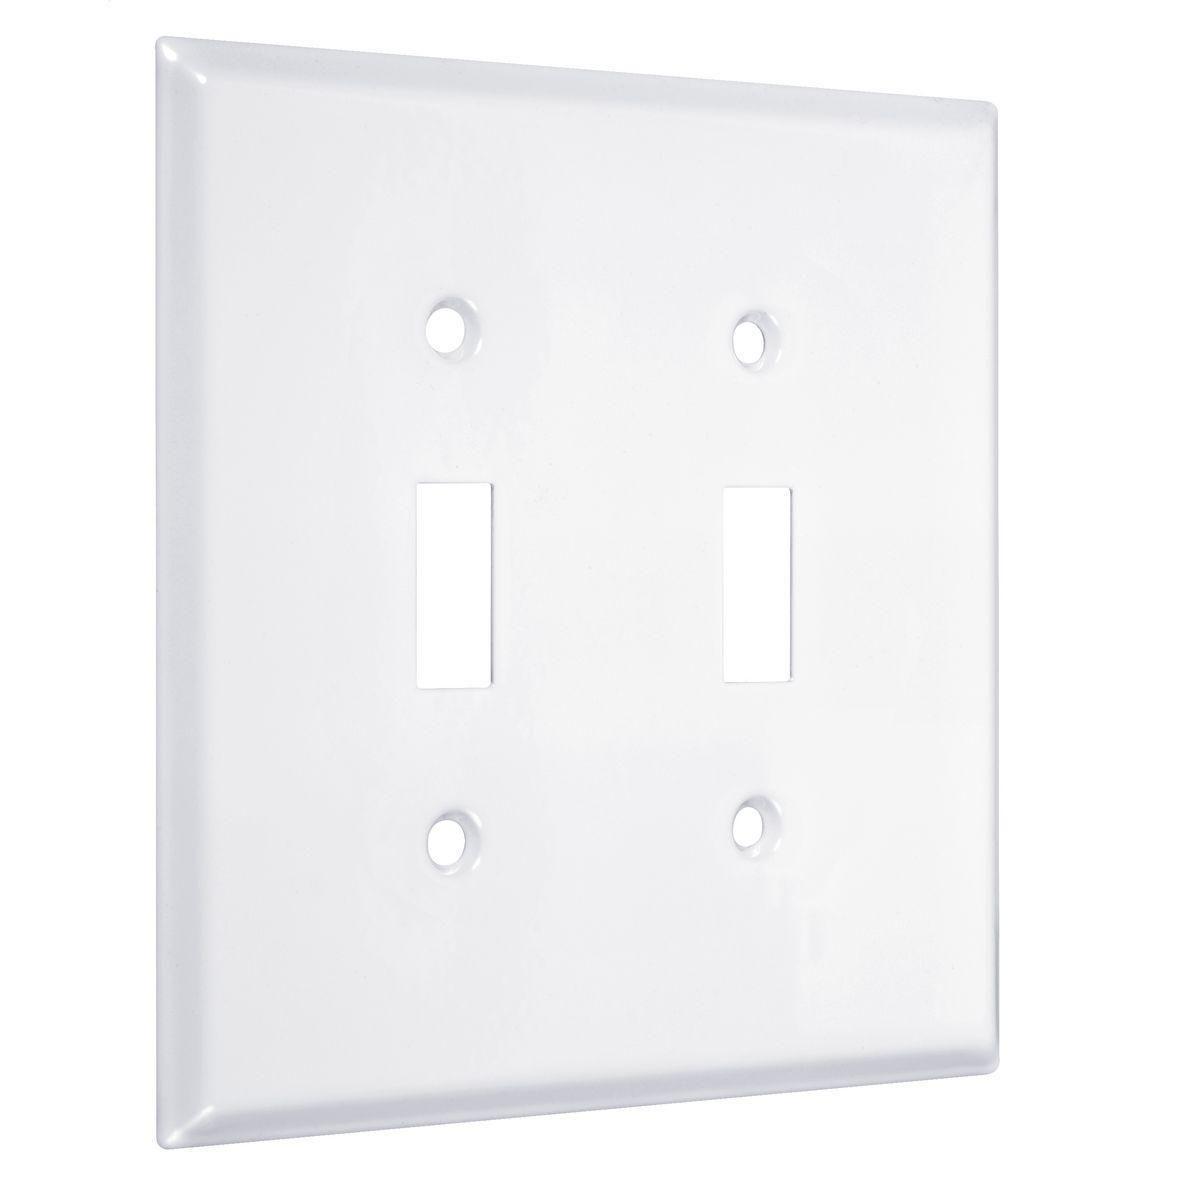 Hubbell WJW-TT 2-Gang Metal Wallplate, Jumbo, 2-Toggle, White Smooth  ; Easily primed and painted to match or complement walls. ; Won't bow, crack or distort during installation. ; Premium North American powder coat. ; Includes screw(s) in matching finish.